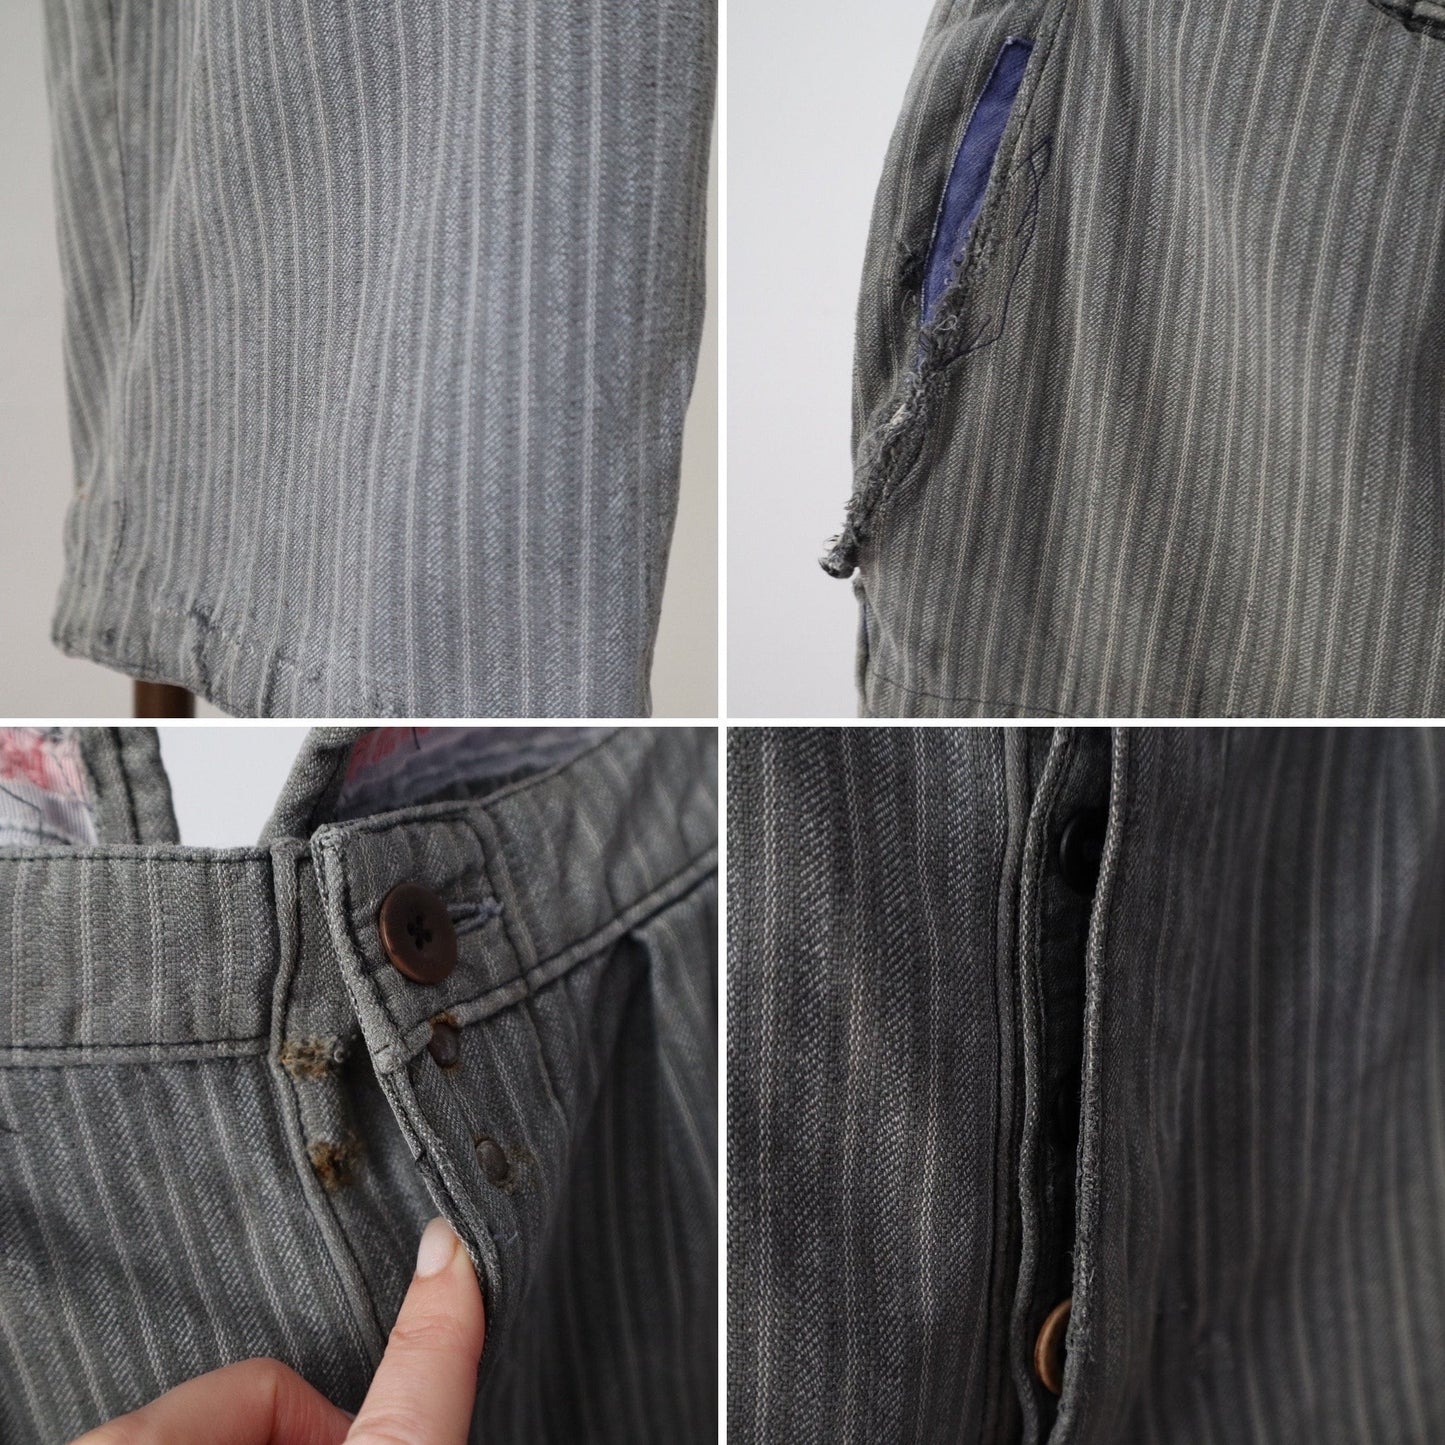 French 1940s Workwear Trousers Grey Stripe Salt Pepper Cotton Repaired Patched Chore Pants